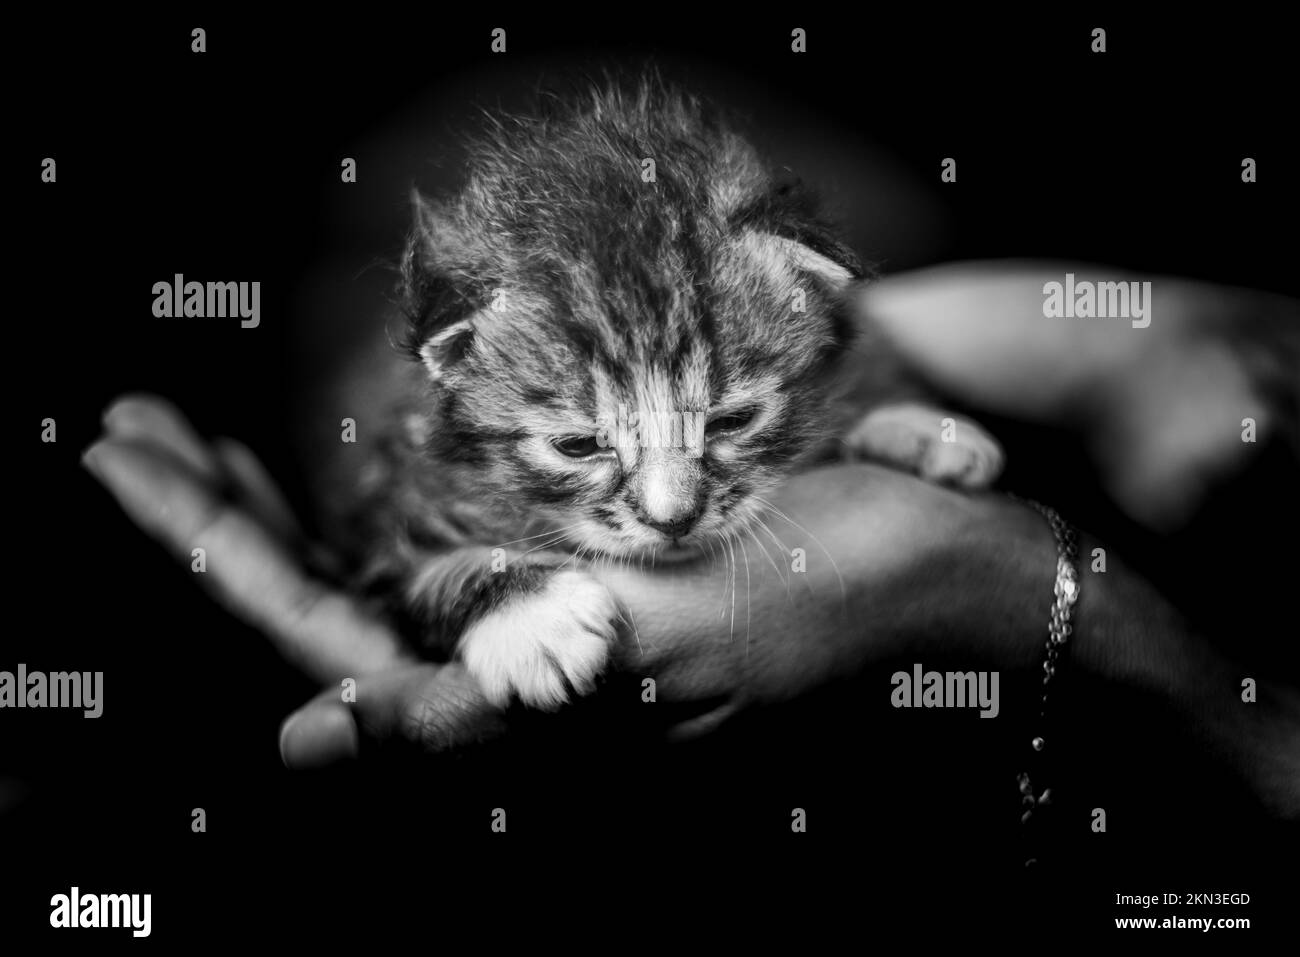 Baby kitten in a female human hand. Two weeks old newborn baby cat laying in the hand of a woman. Selective focus on the little pet. She look curious. Stock Photo